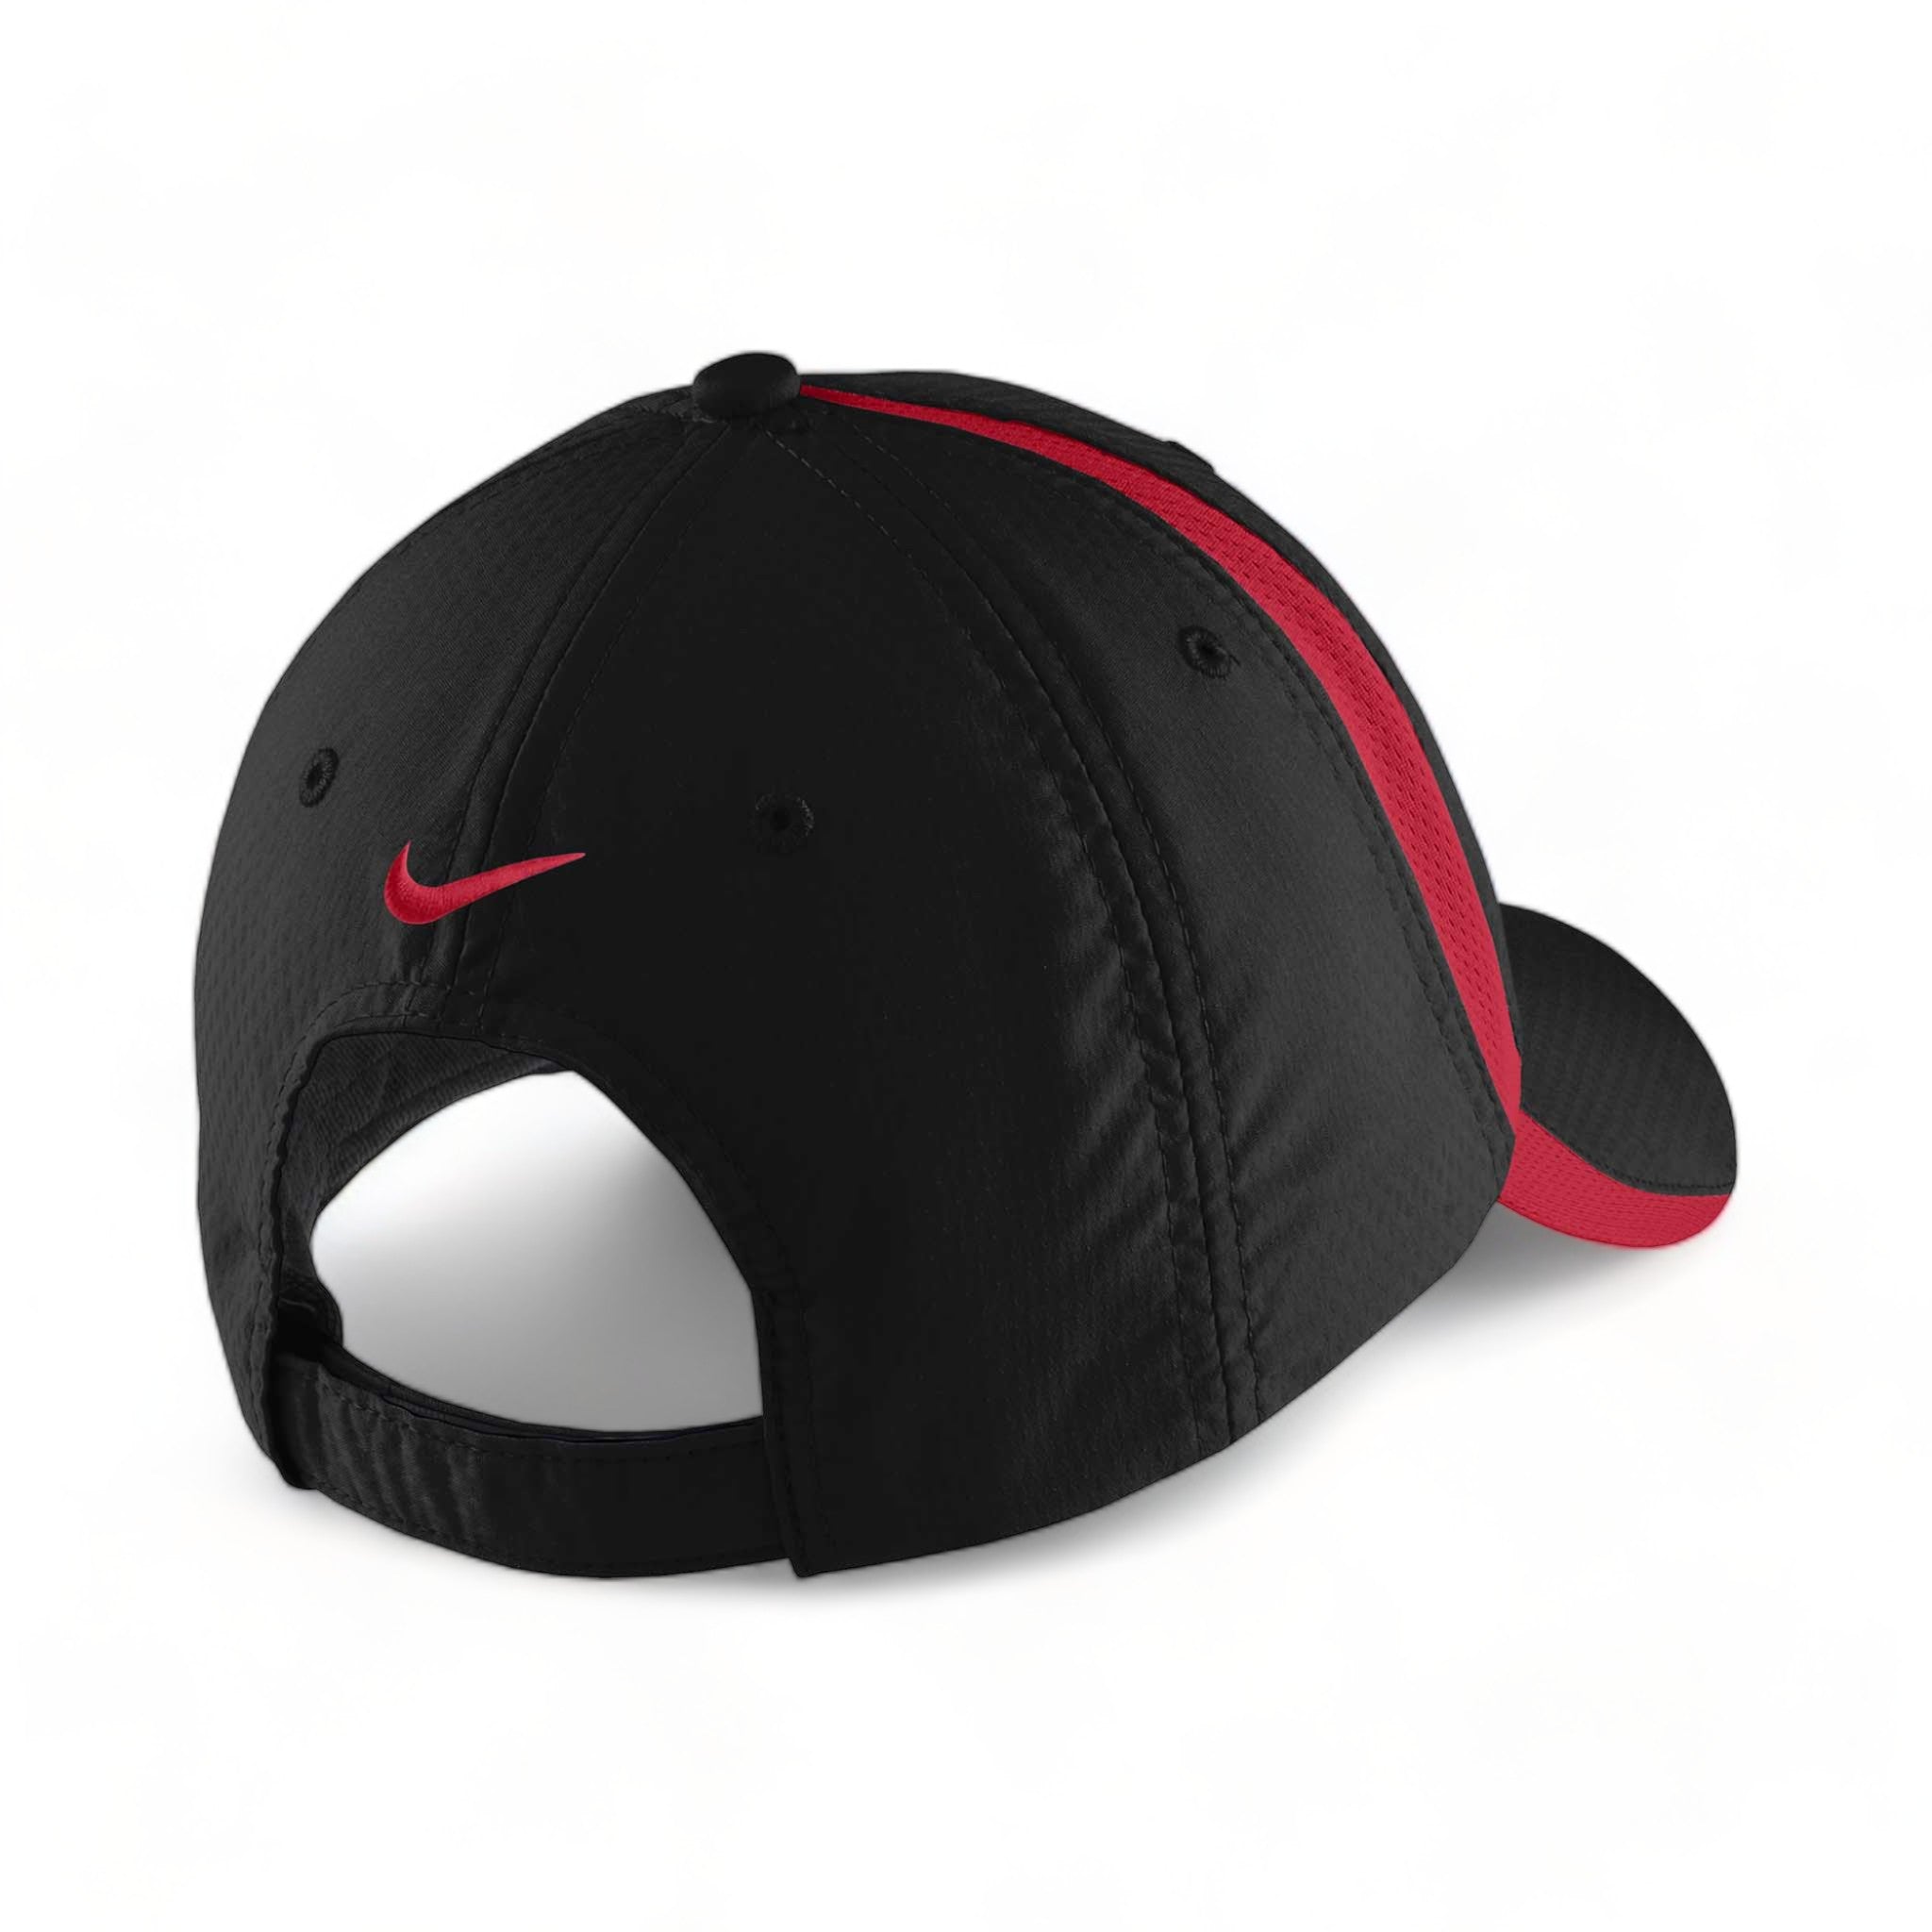 Back view of Nike NKFD9709 custom hat in black and gym red